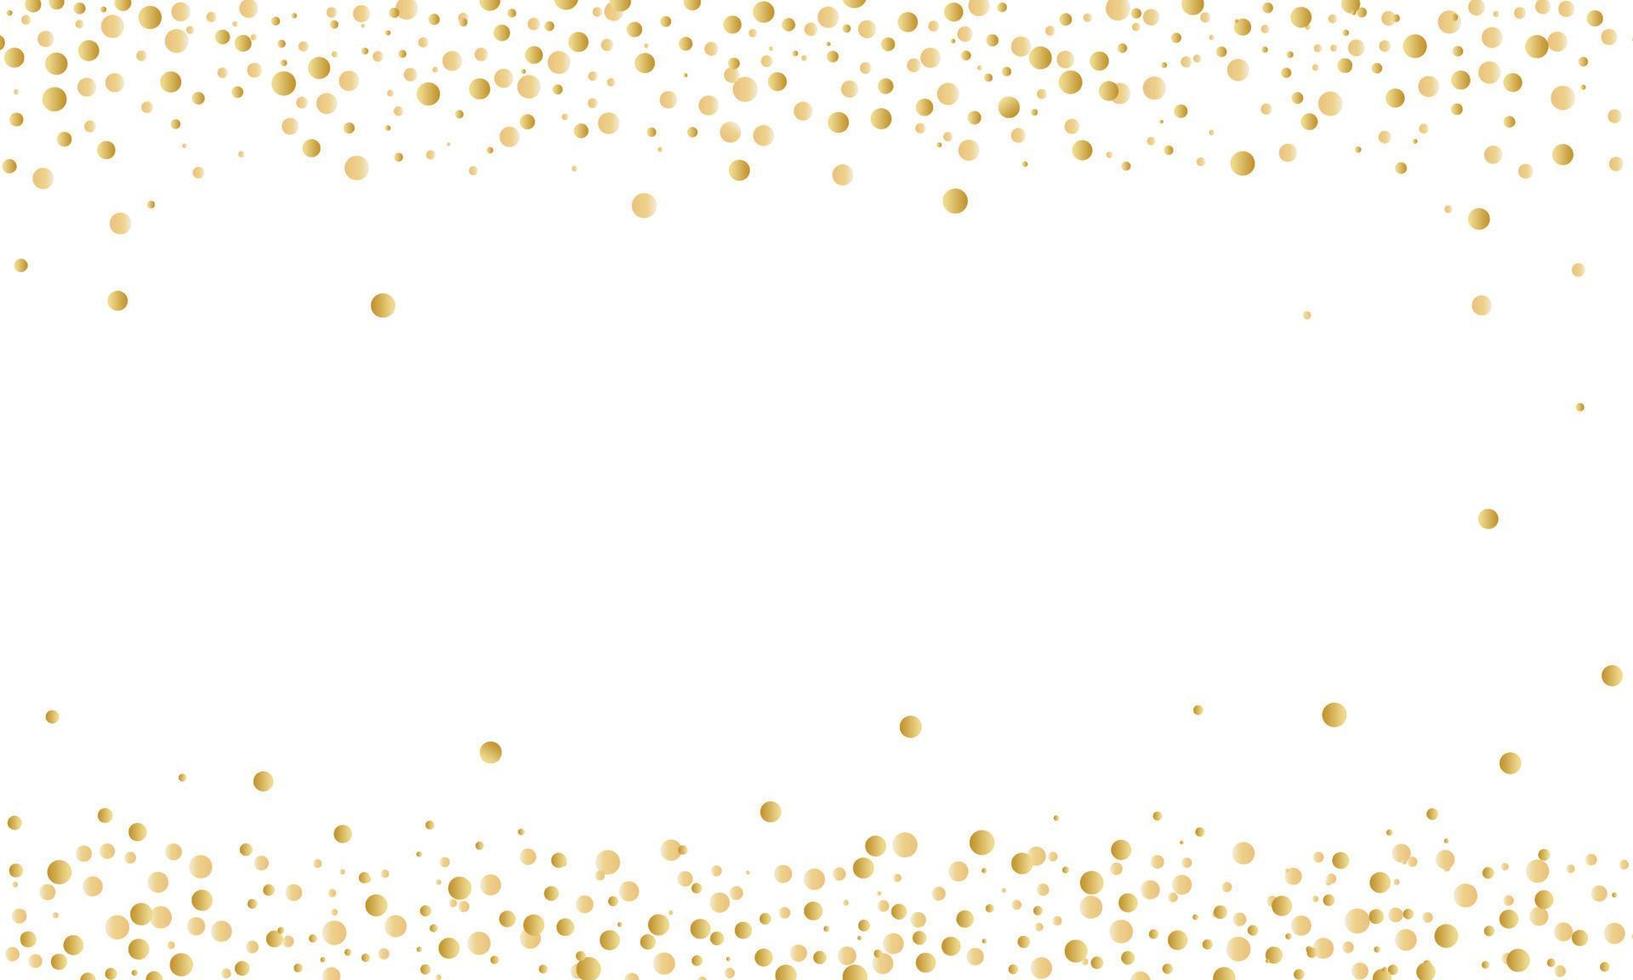 congratulatory background with gold confetti top and bottom . Vector illustration